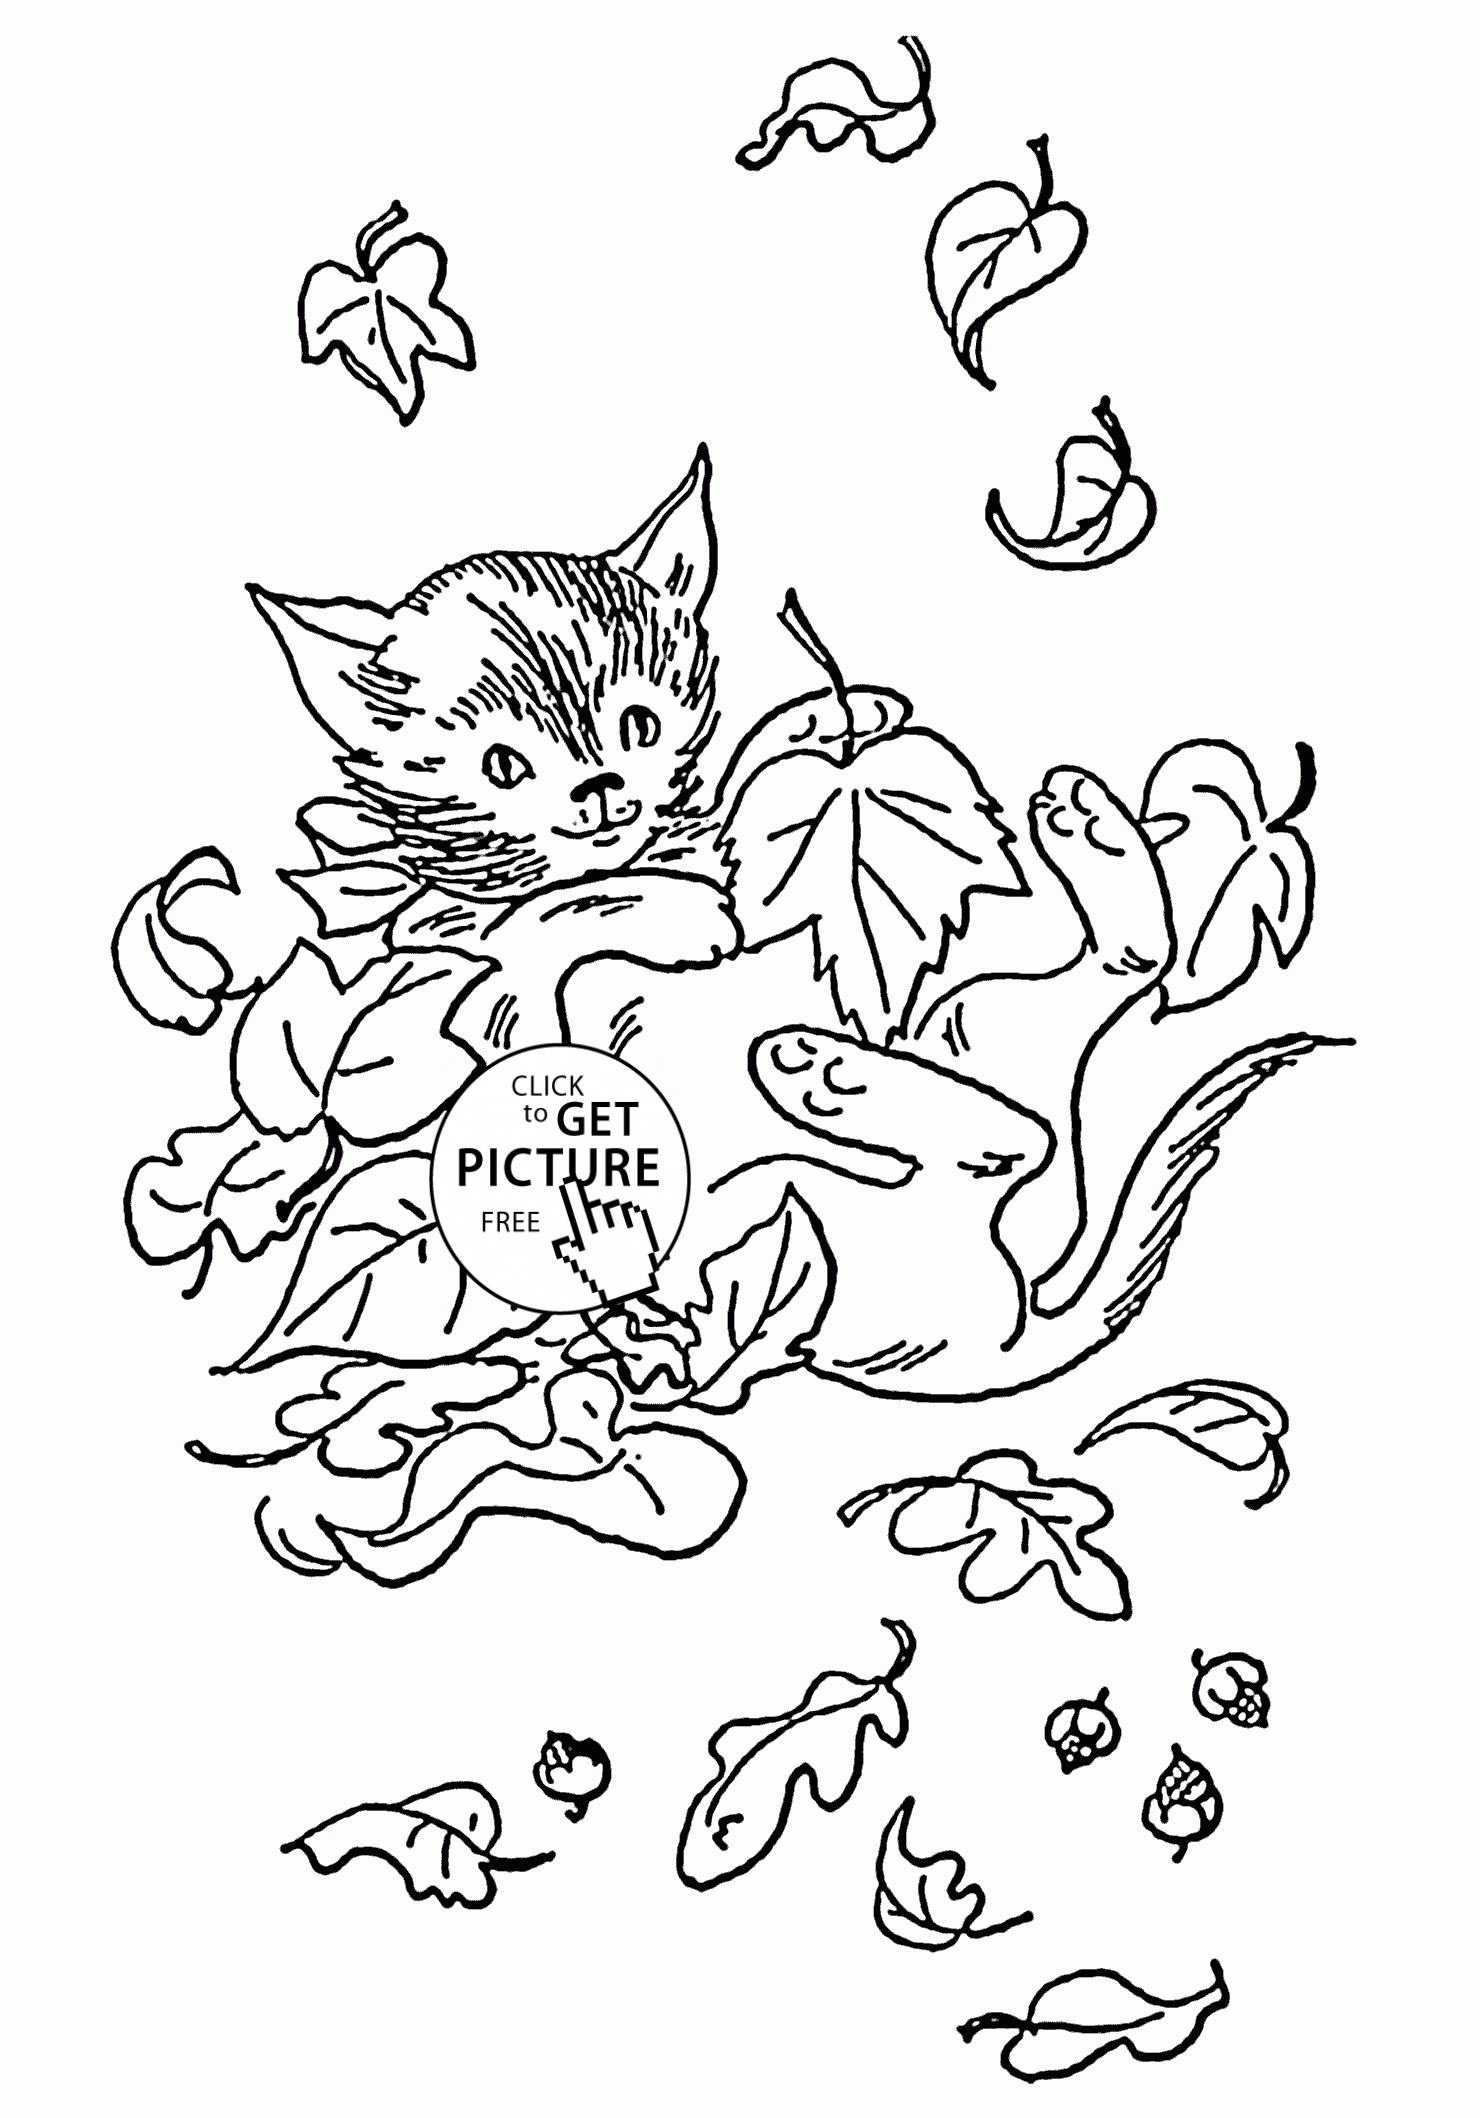 Free Coloring Pages Of Leaves Cat With Fall Leaves Coloring Pages For Kids Fall Printables Free